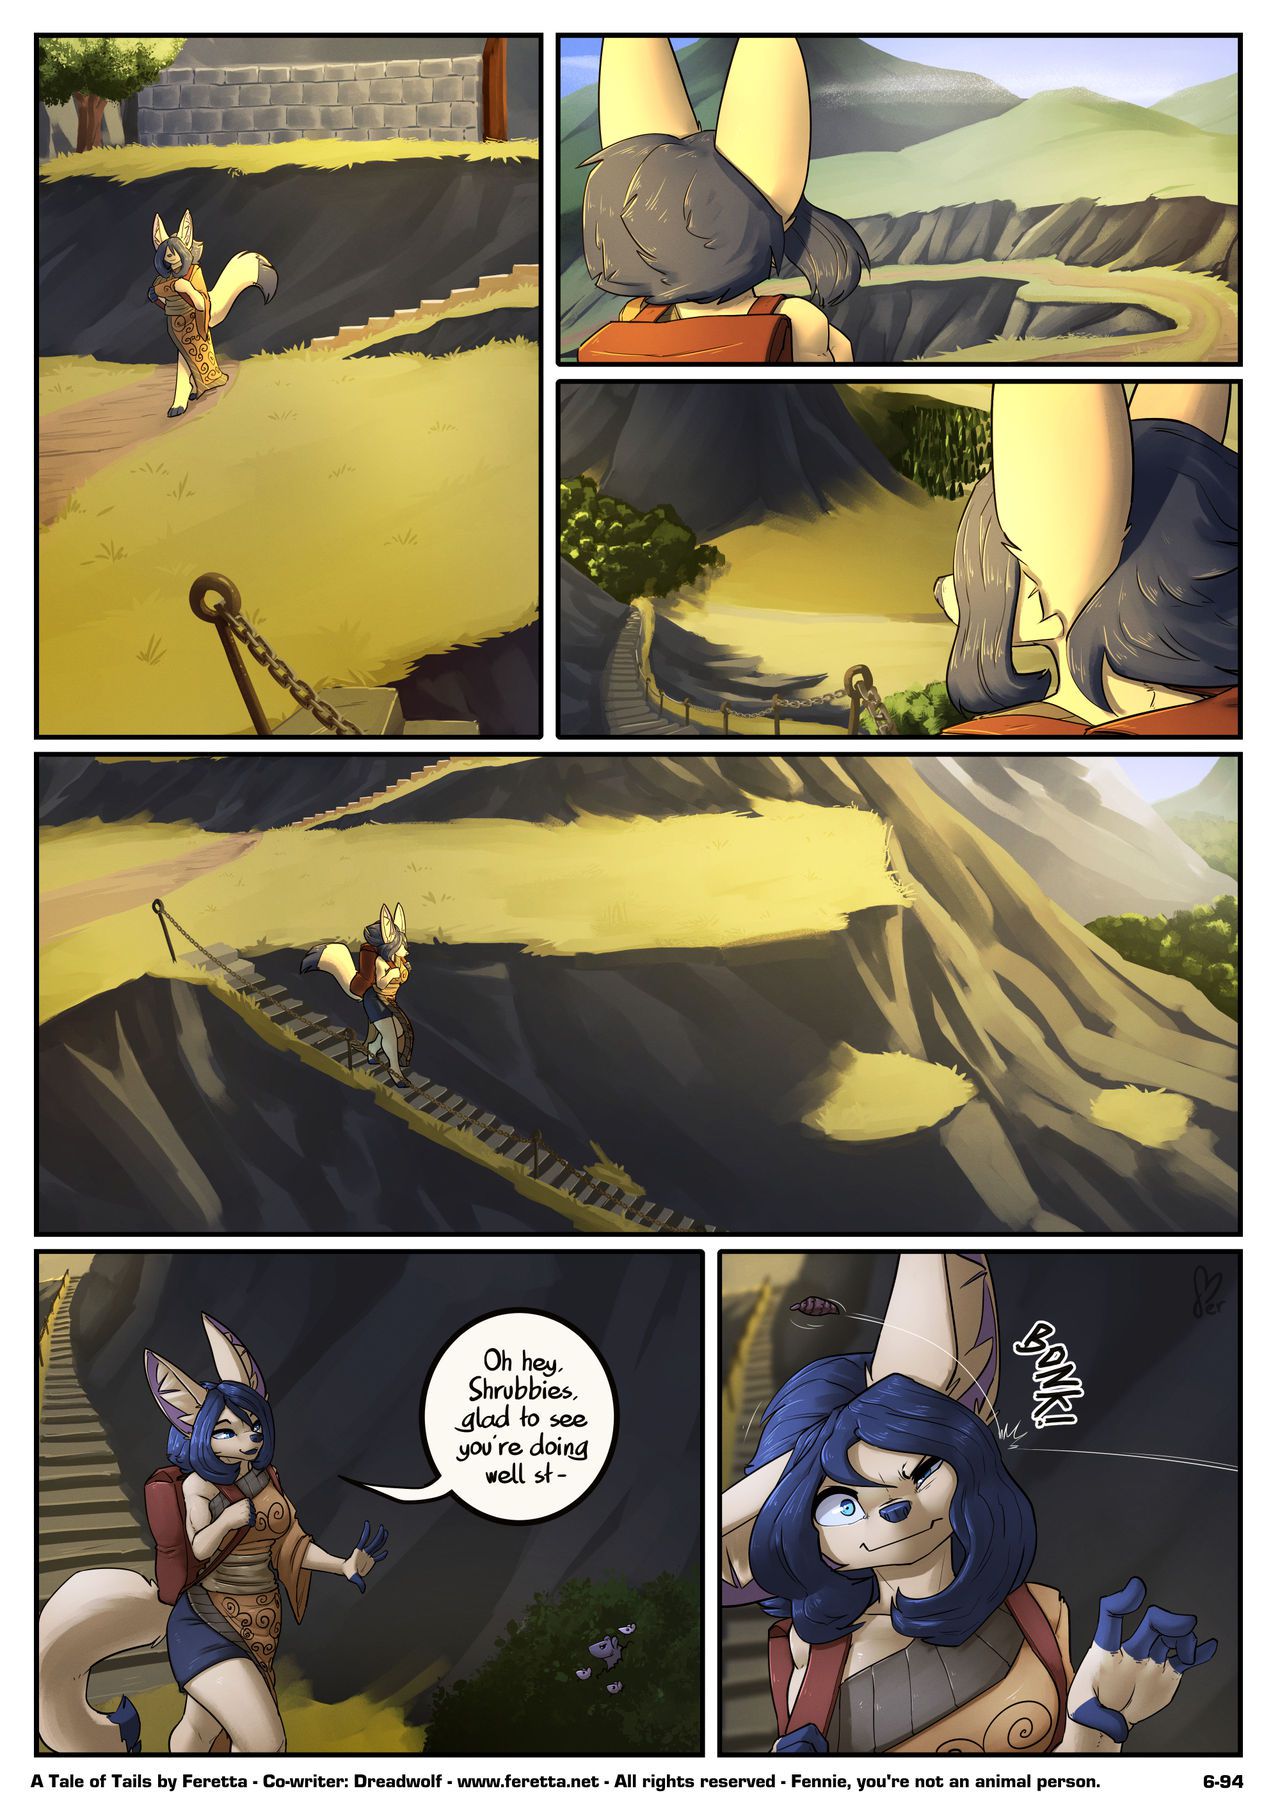 [Feretta] Farellian Legends: A Tale of Tails (w/Extras) [Ongoing] 389